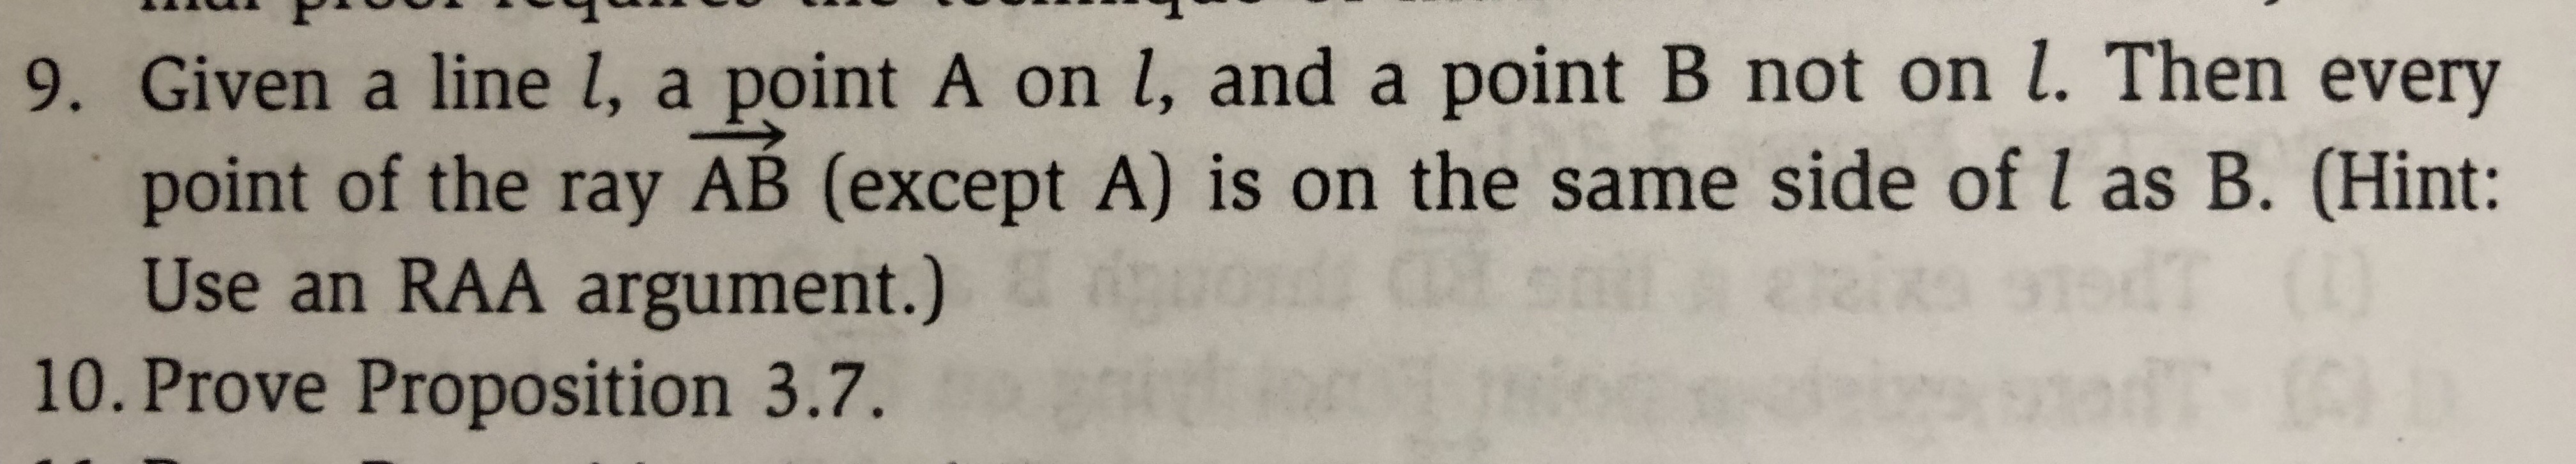 9. Given a line l, a point A on l, and a point B not on L. Then every
point of the ray AB (except A) is on the same side of l as B. (Hint:
Use an RAA argument.)
10. Prove Proposition 3.7.
